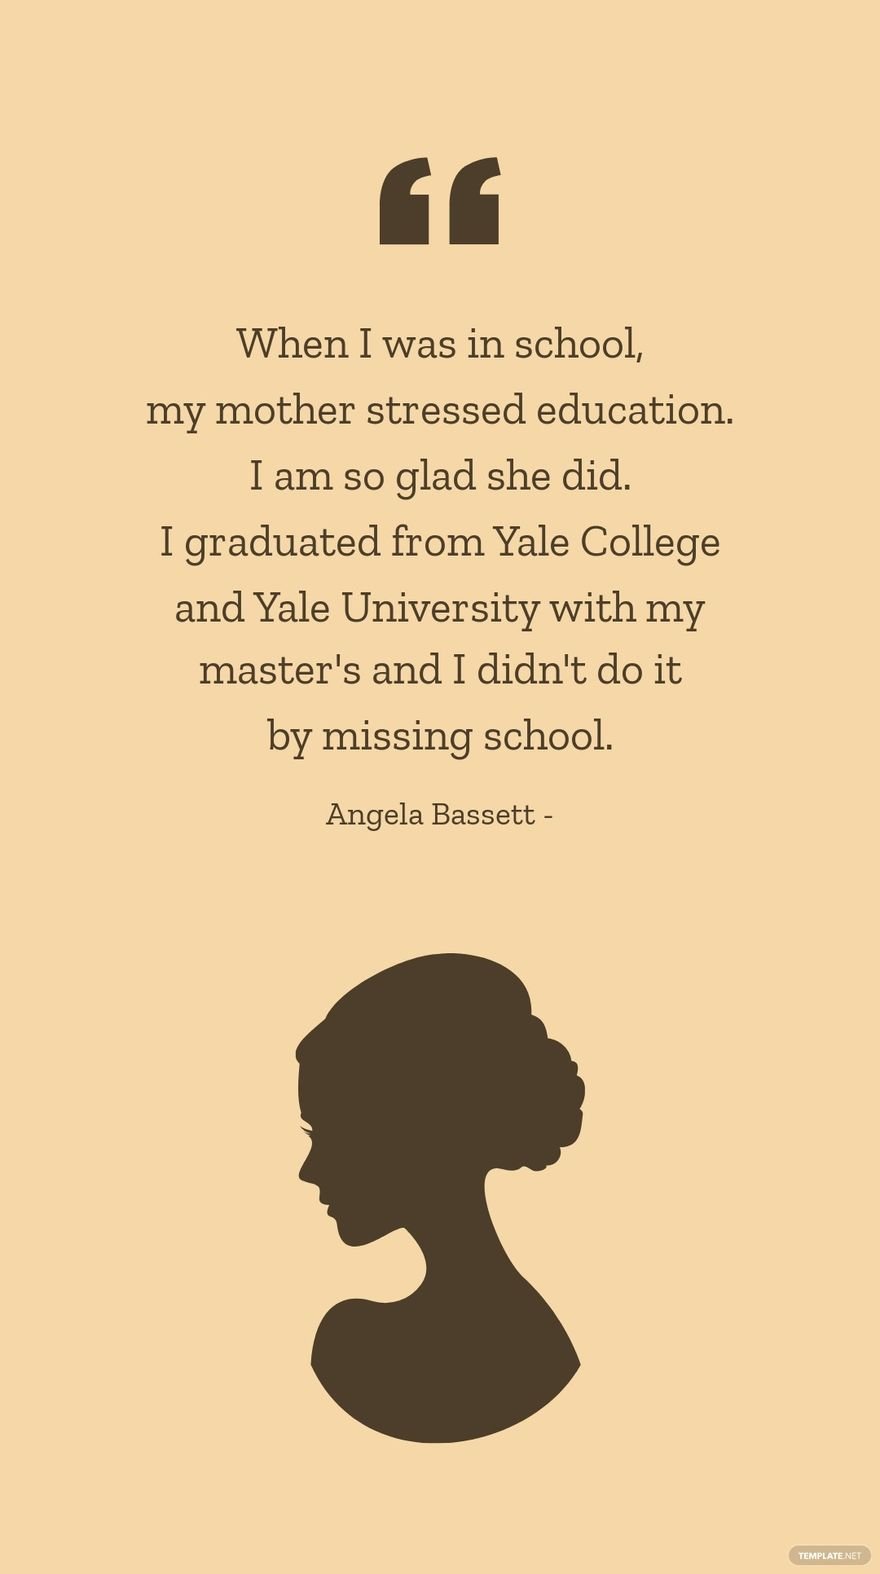 Angela Bassett - When I was in school, my mother stressed education. I am so glad she did. I graduated from Yale College and Yale University with my master's and I didn't do it by missing school.